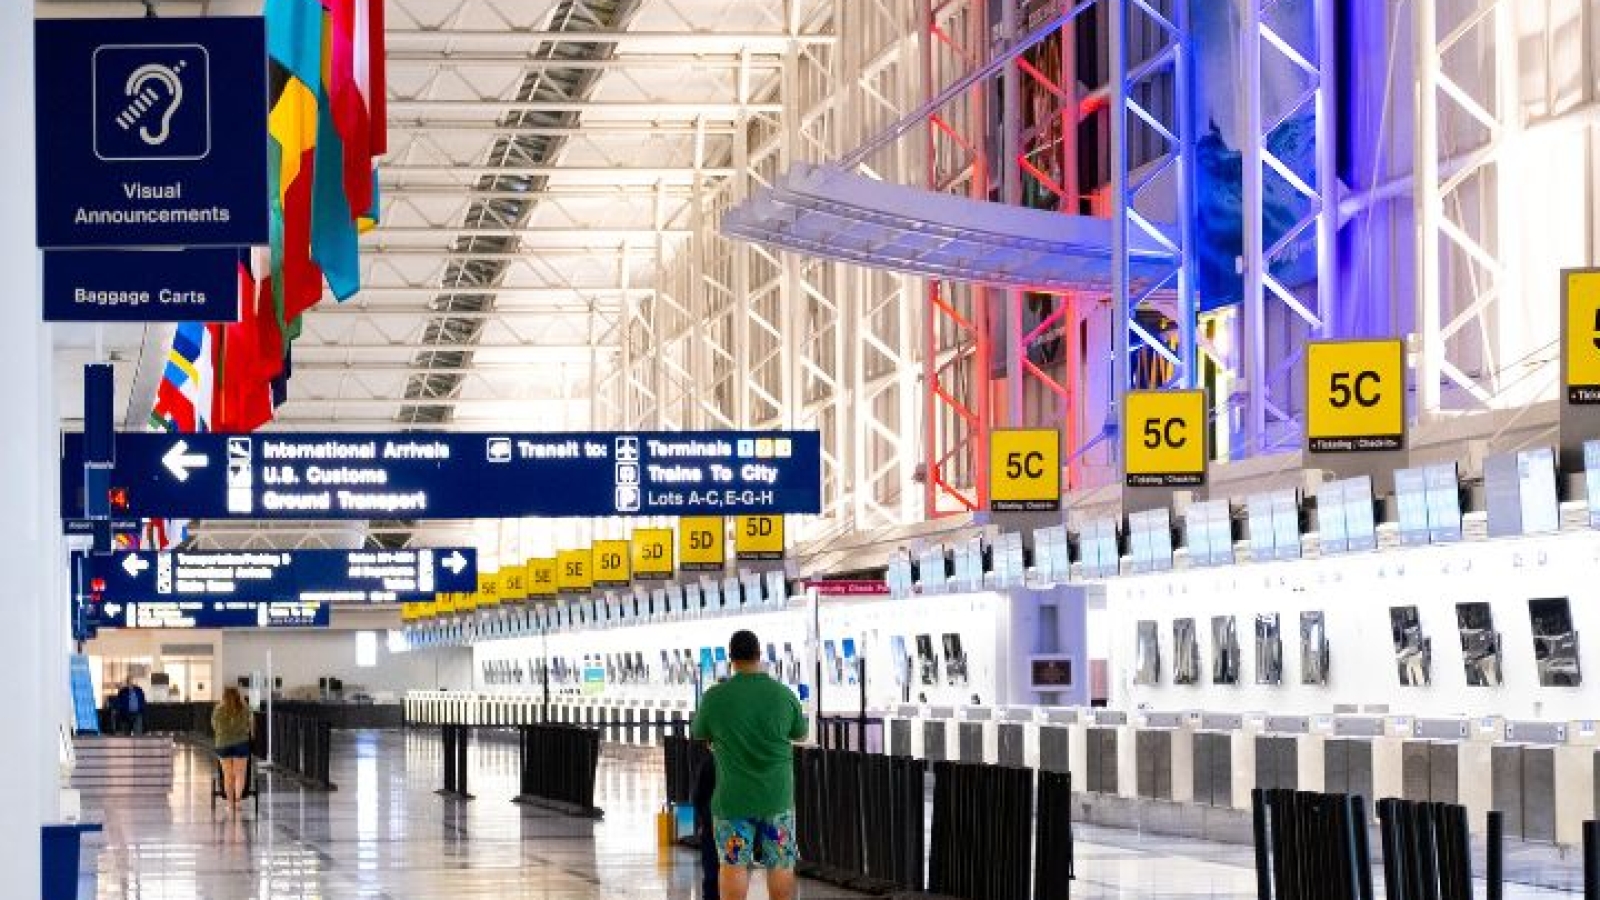 Airports and Transportation Hubs Security Systems